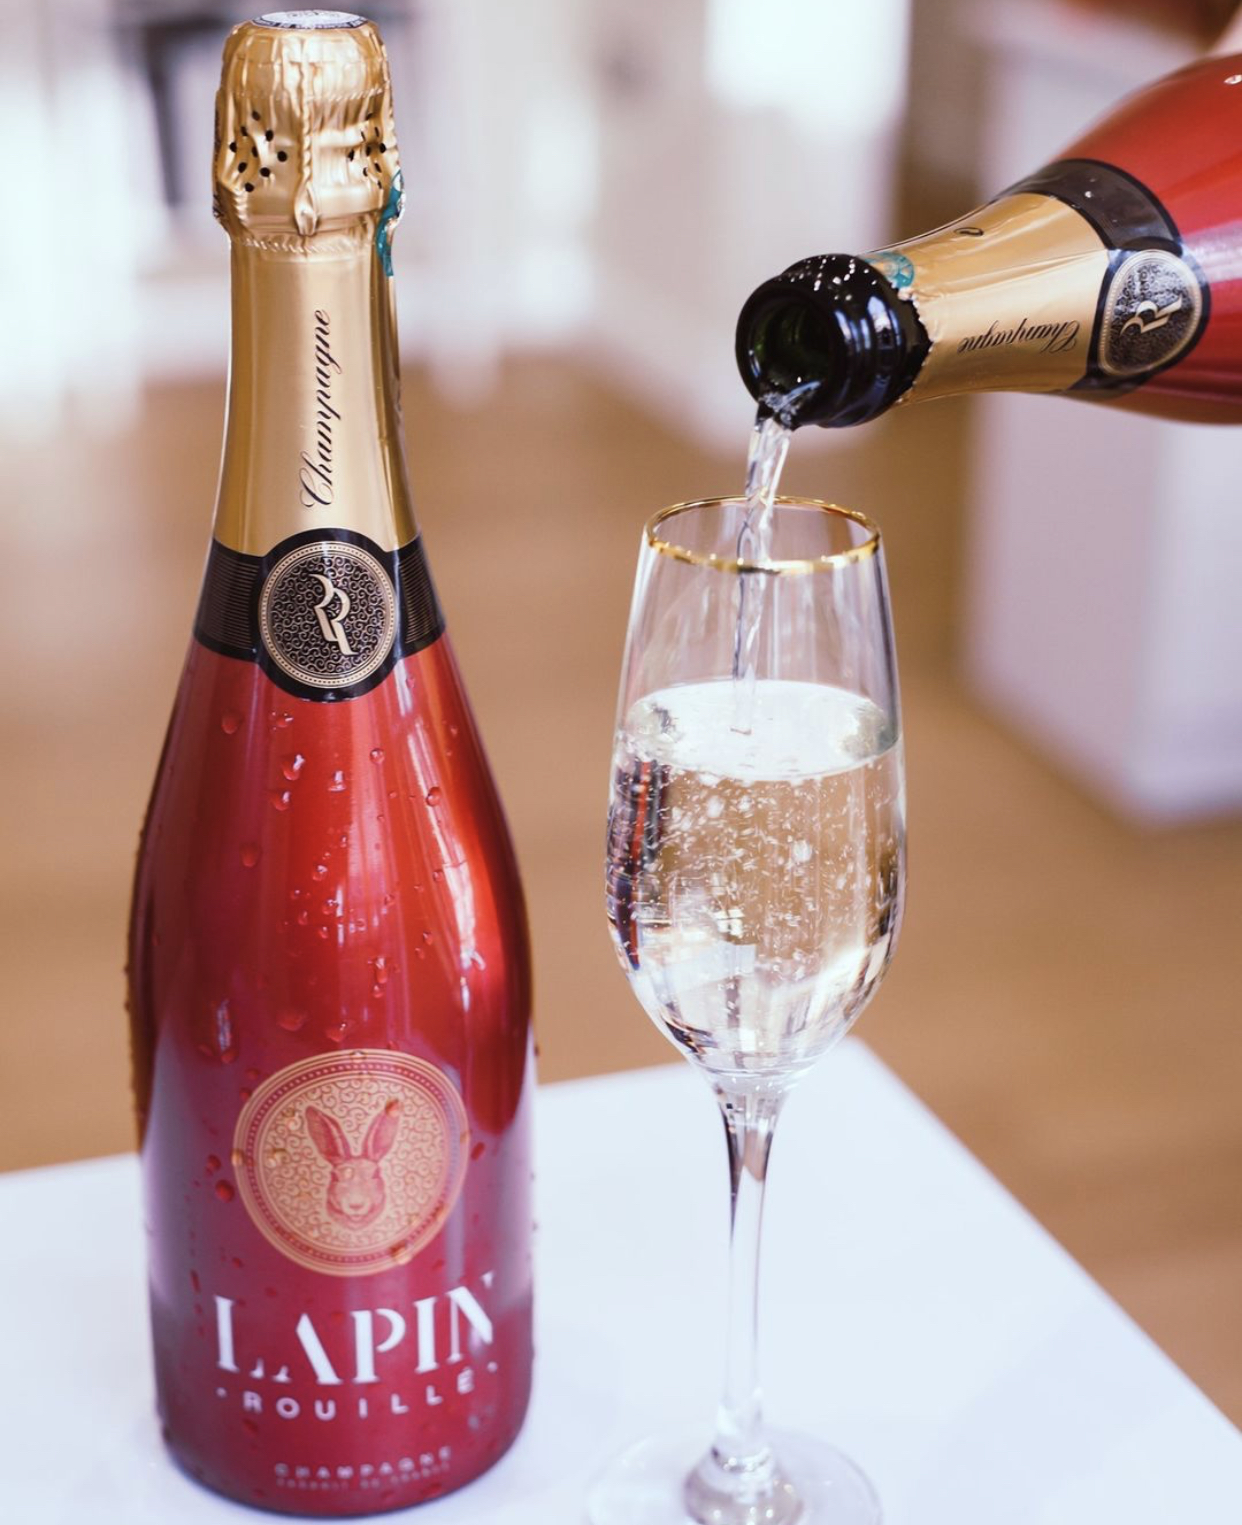 Lapin Rouillé: Meet Nichole Johnson The Woman Behind The First Black-Owned Champagne Brand Sold In The U.K.